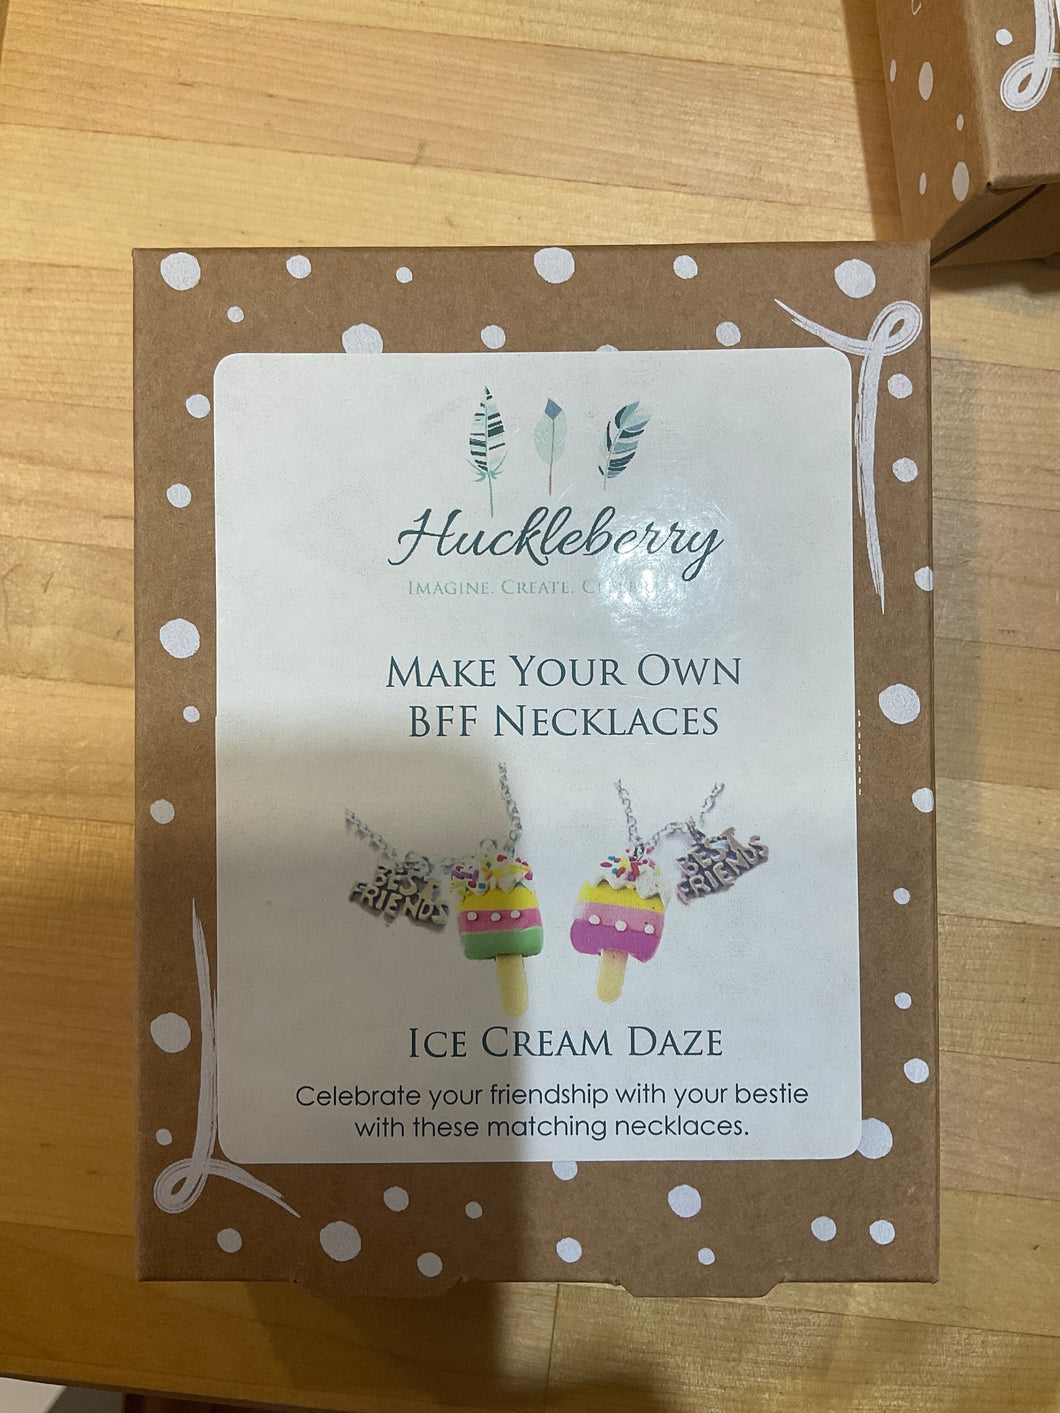 Huckleberry Make your own BFF Necklaces Ice Cream Daze